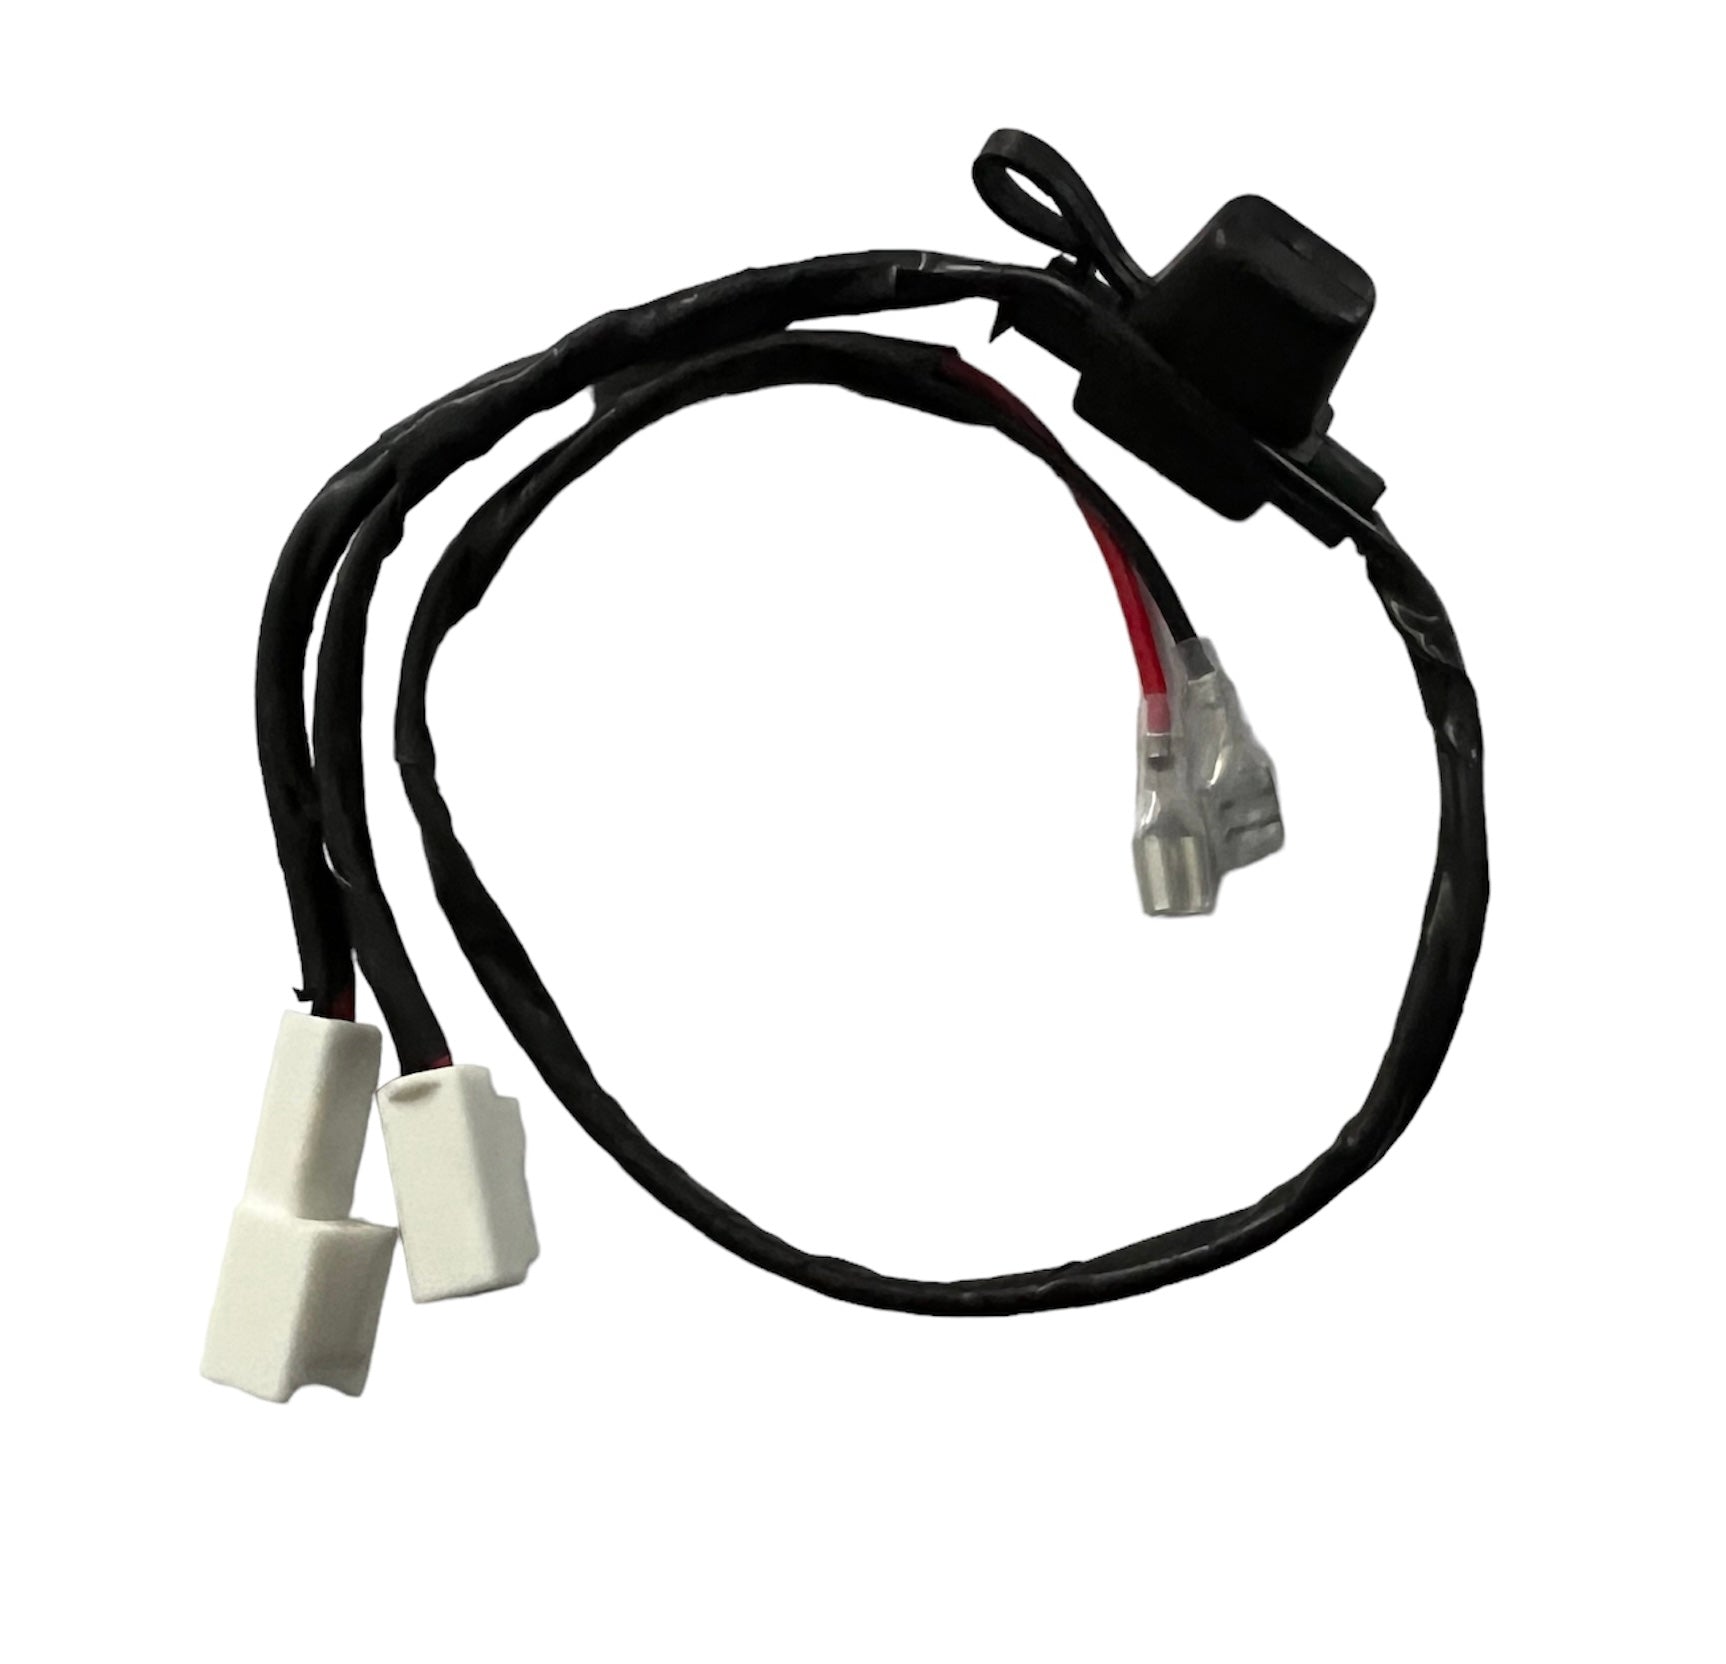 Toyota Piggyback Wiring Harness for USB Charger/Voltmeter